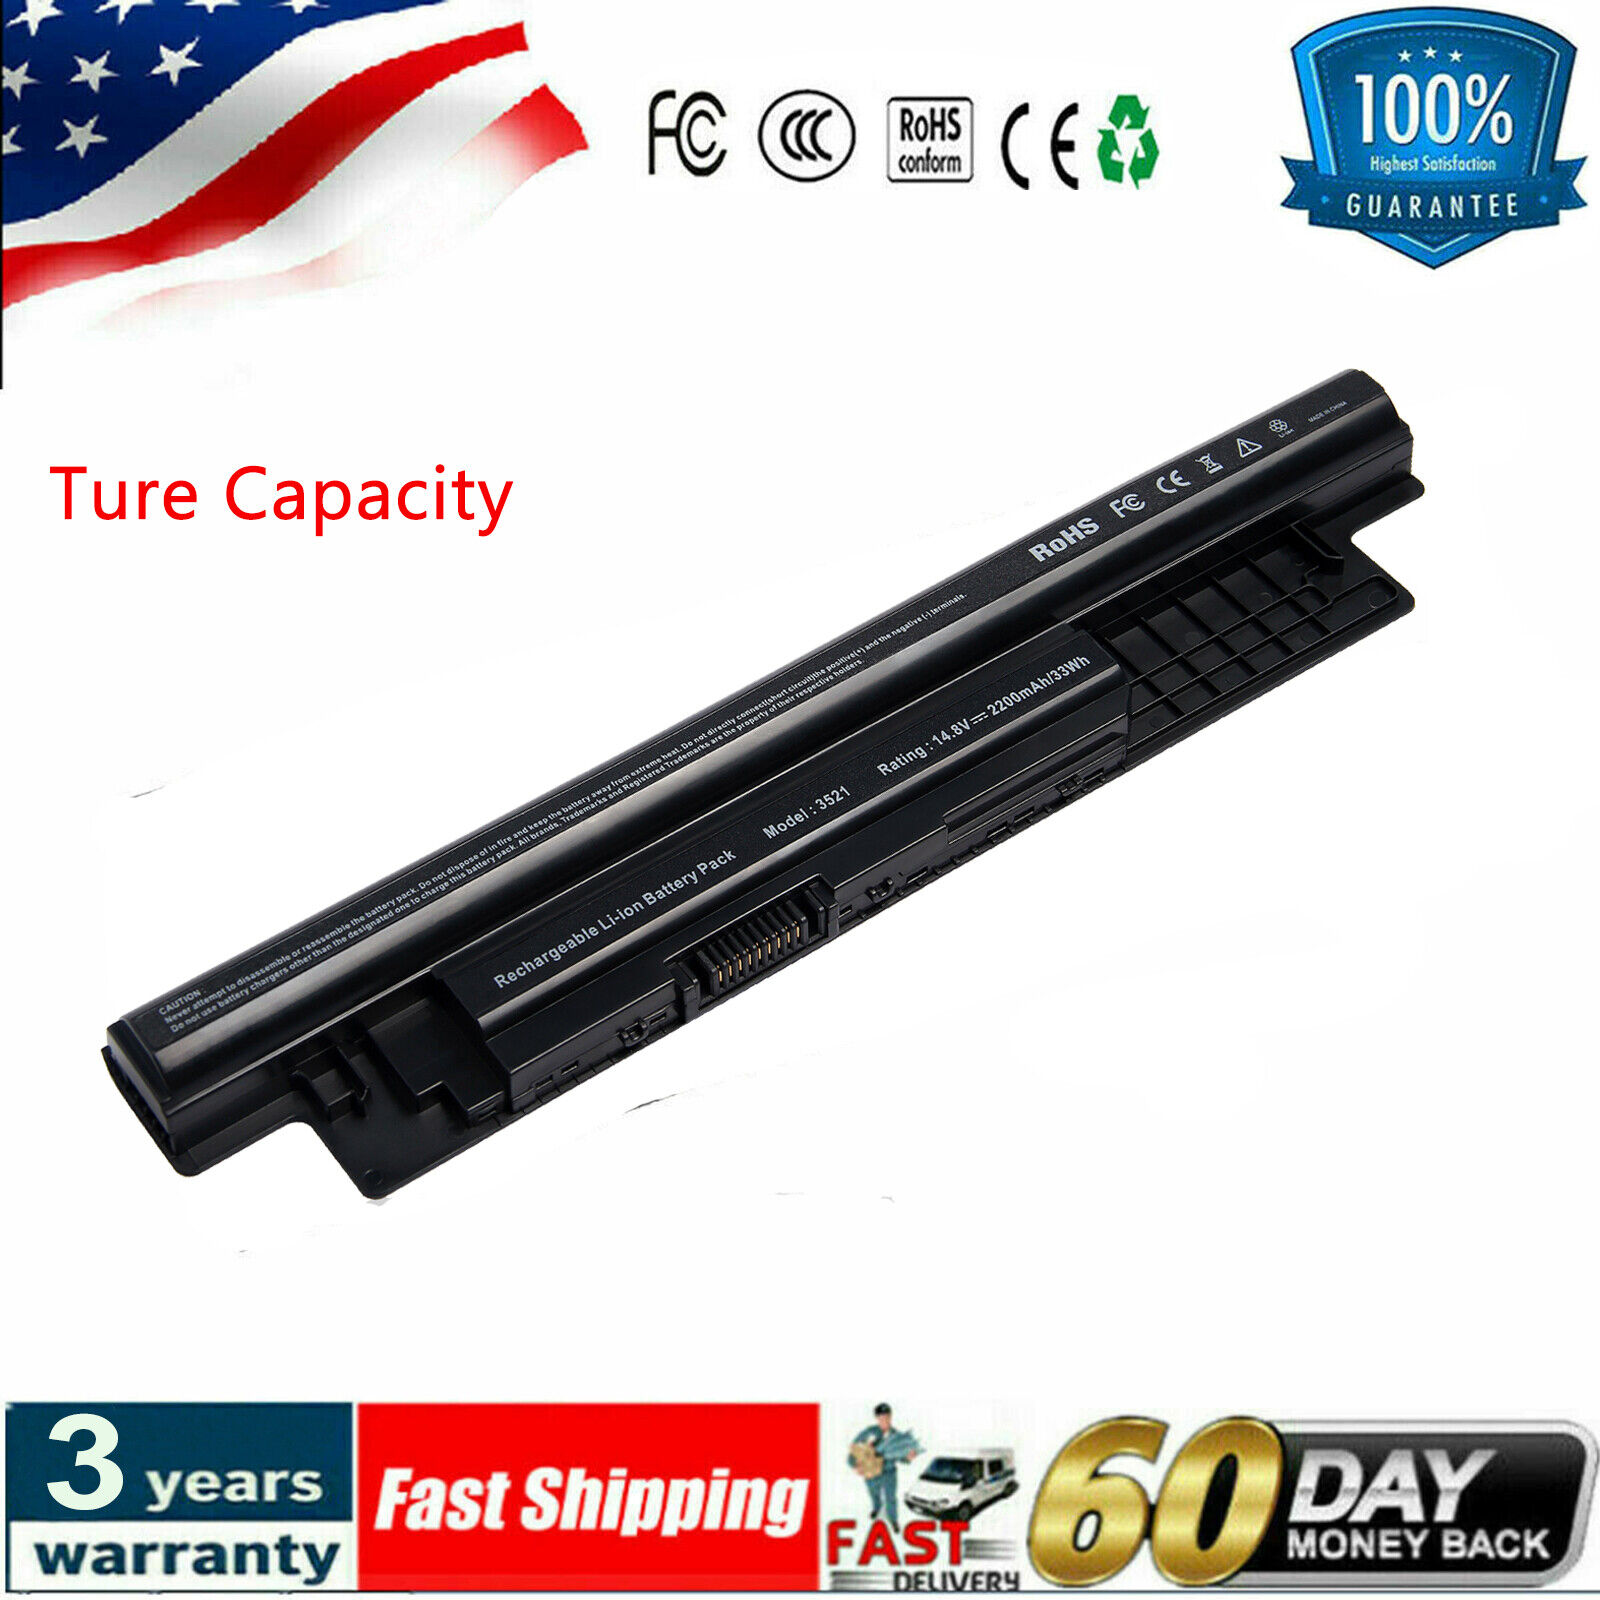  Battery for Dell Inspiron 15 3521 3537 3531 3542 3543 3541 3878 15R 5521 5537